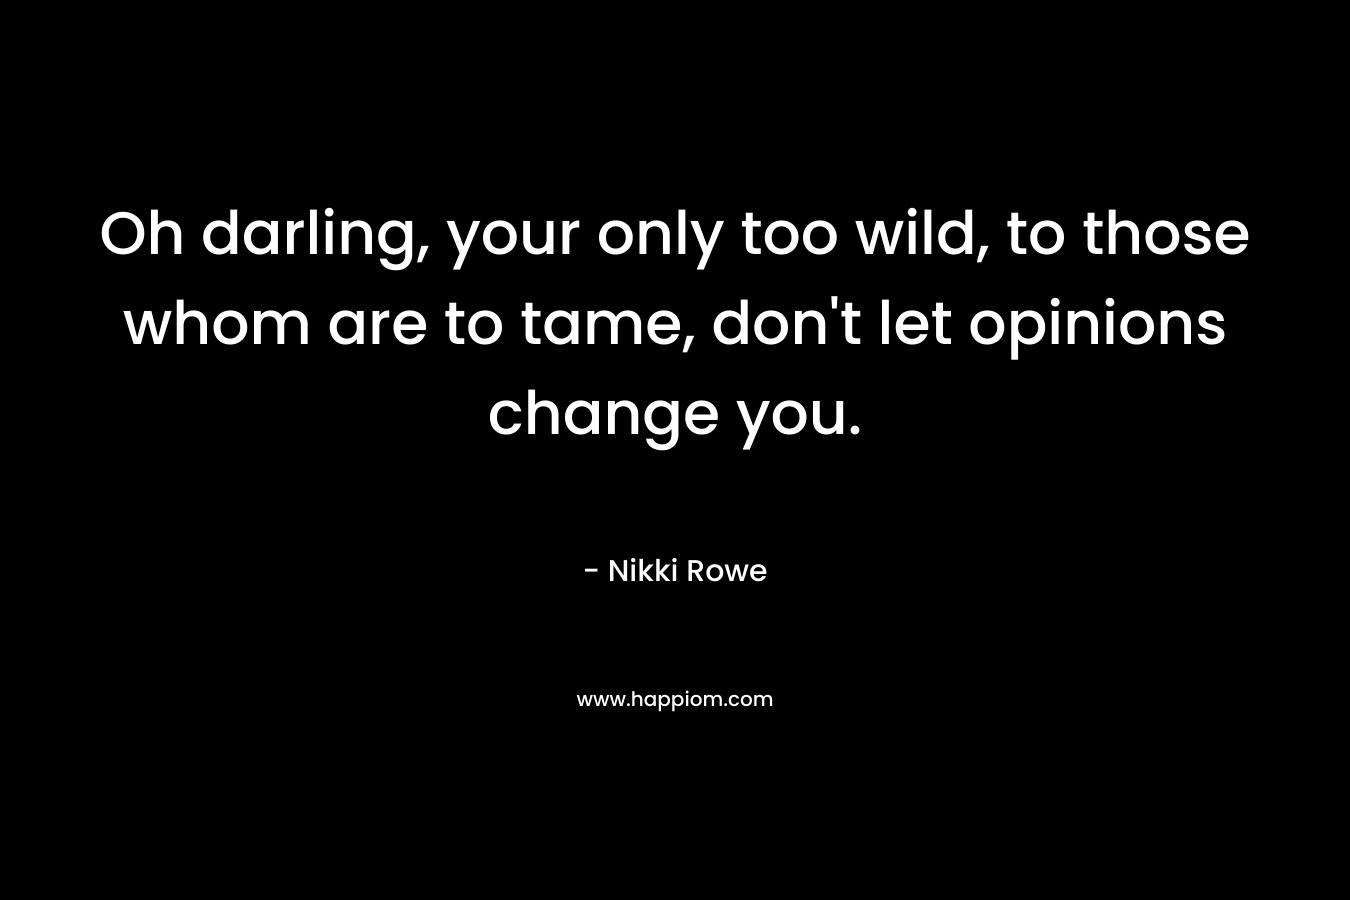 Oh darling, your only too wild, to those whom are to tame, don't let opinions change you.